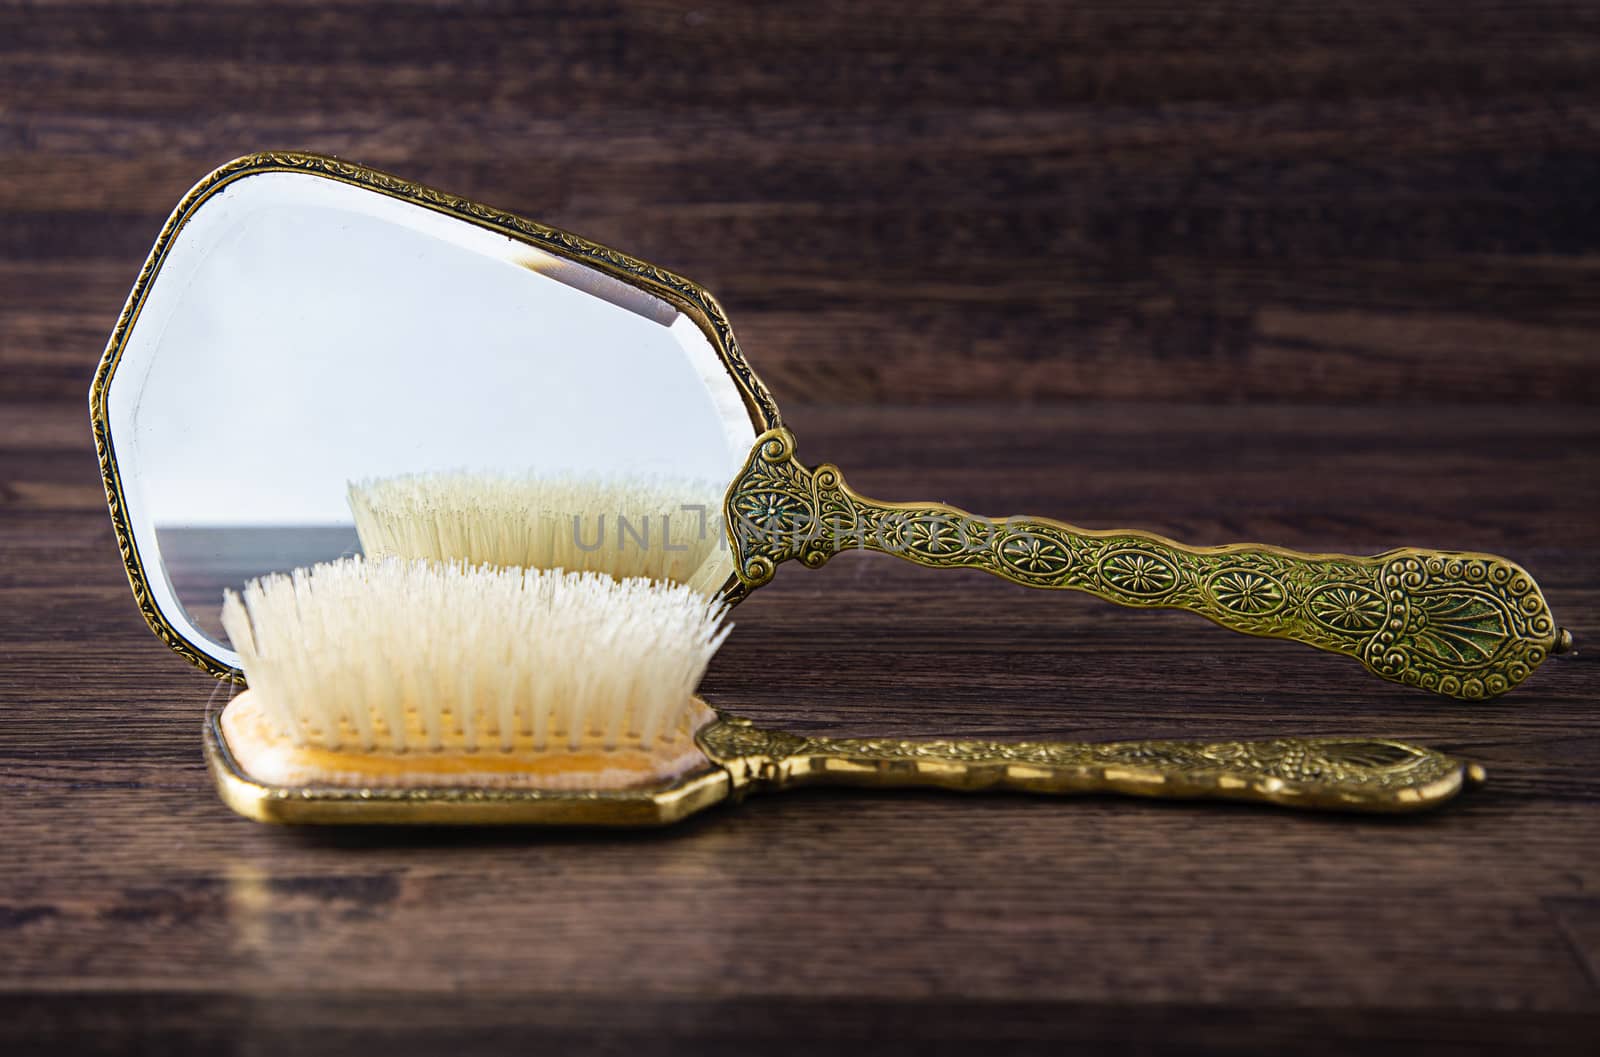 antique hand mirror and hair brush against a dark wood background